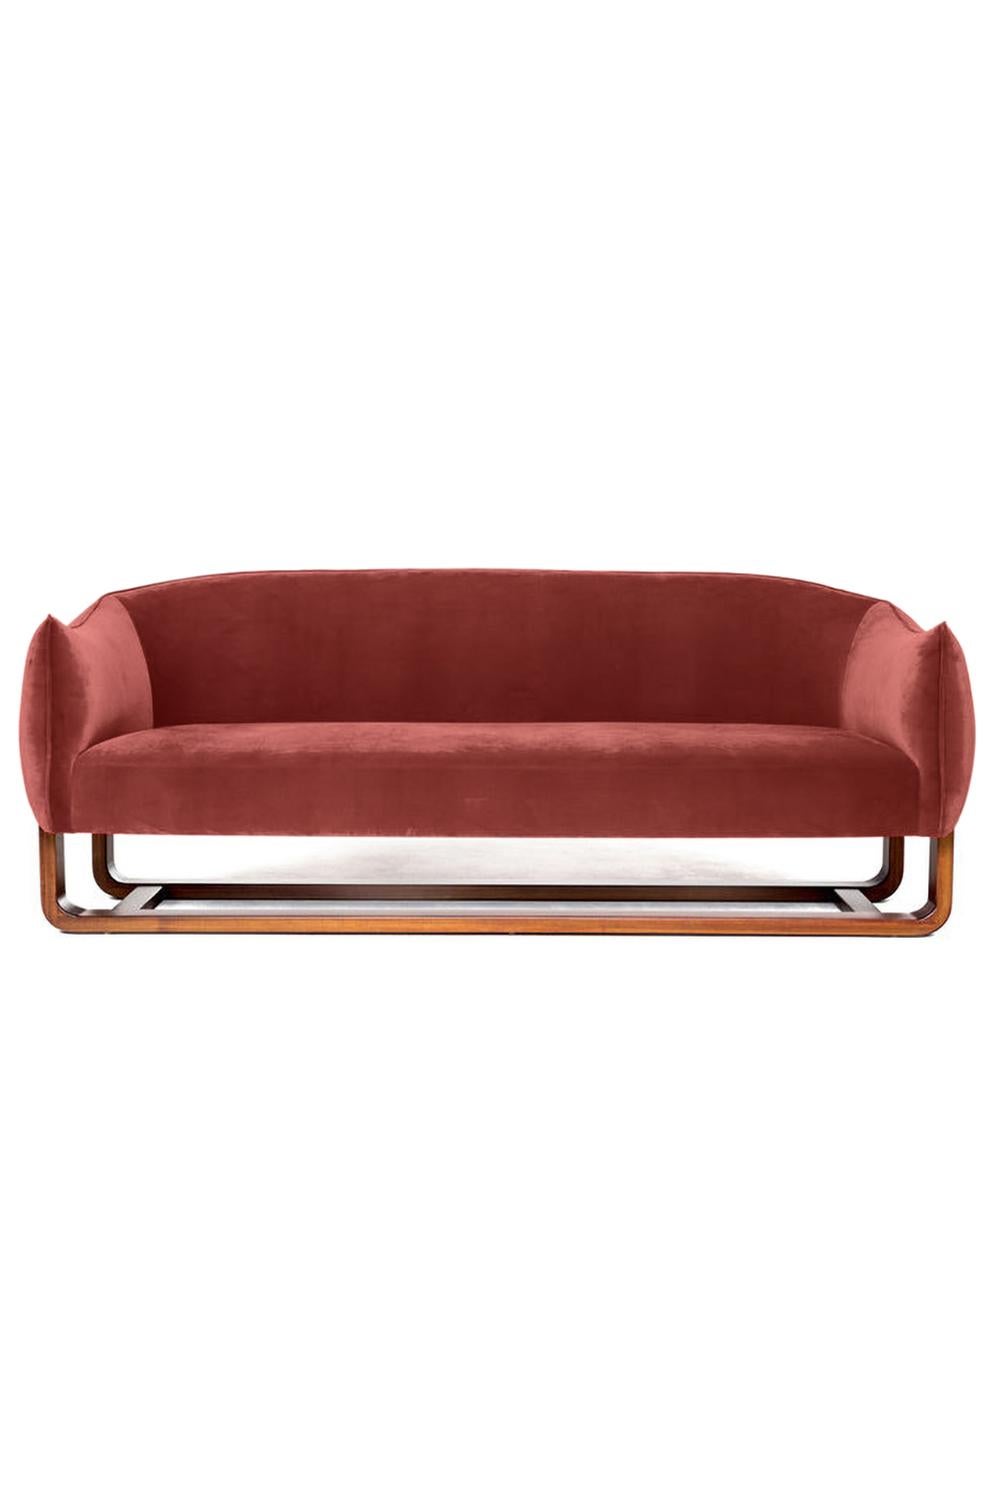 Designer Marie Burgos has expanded on the design concept for her acclaimed Milo lounge chair and created the newly introduced Milo sofa. She uses a molded wooden frame to support the luxuriously comfortable seating that is covered in any of a wide